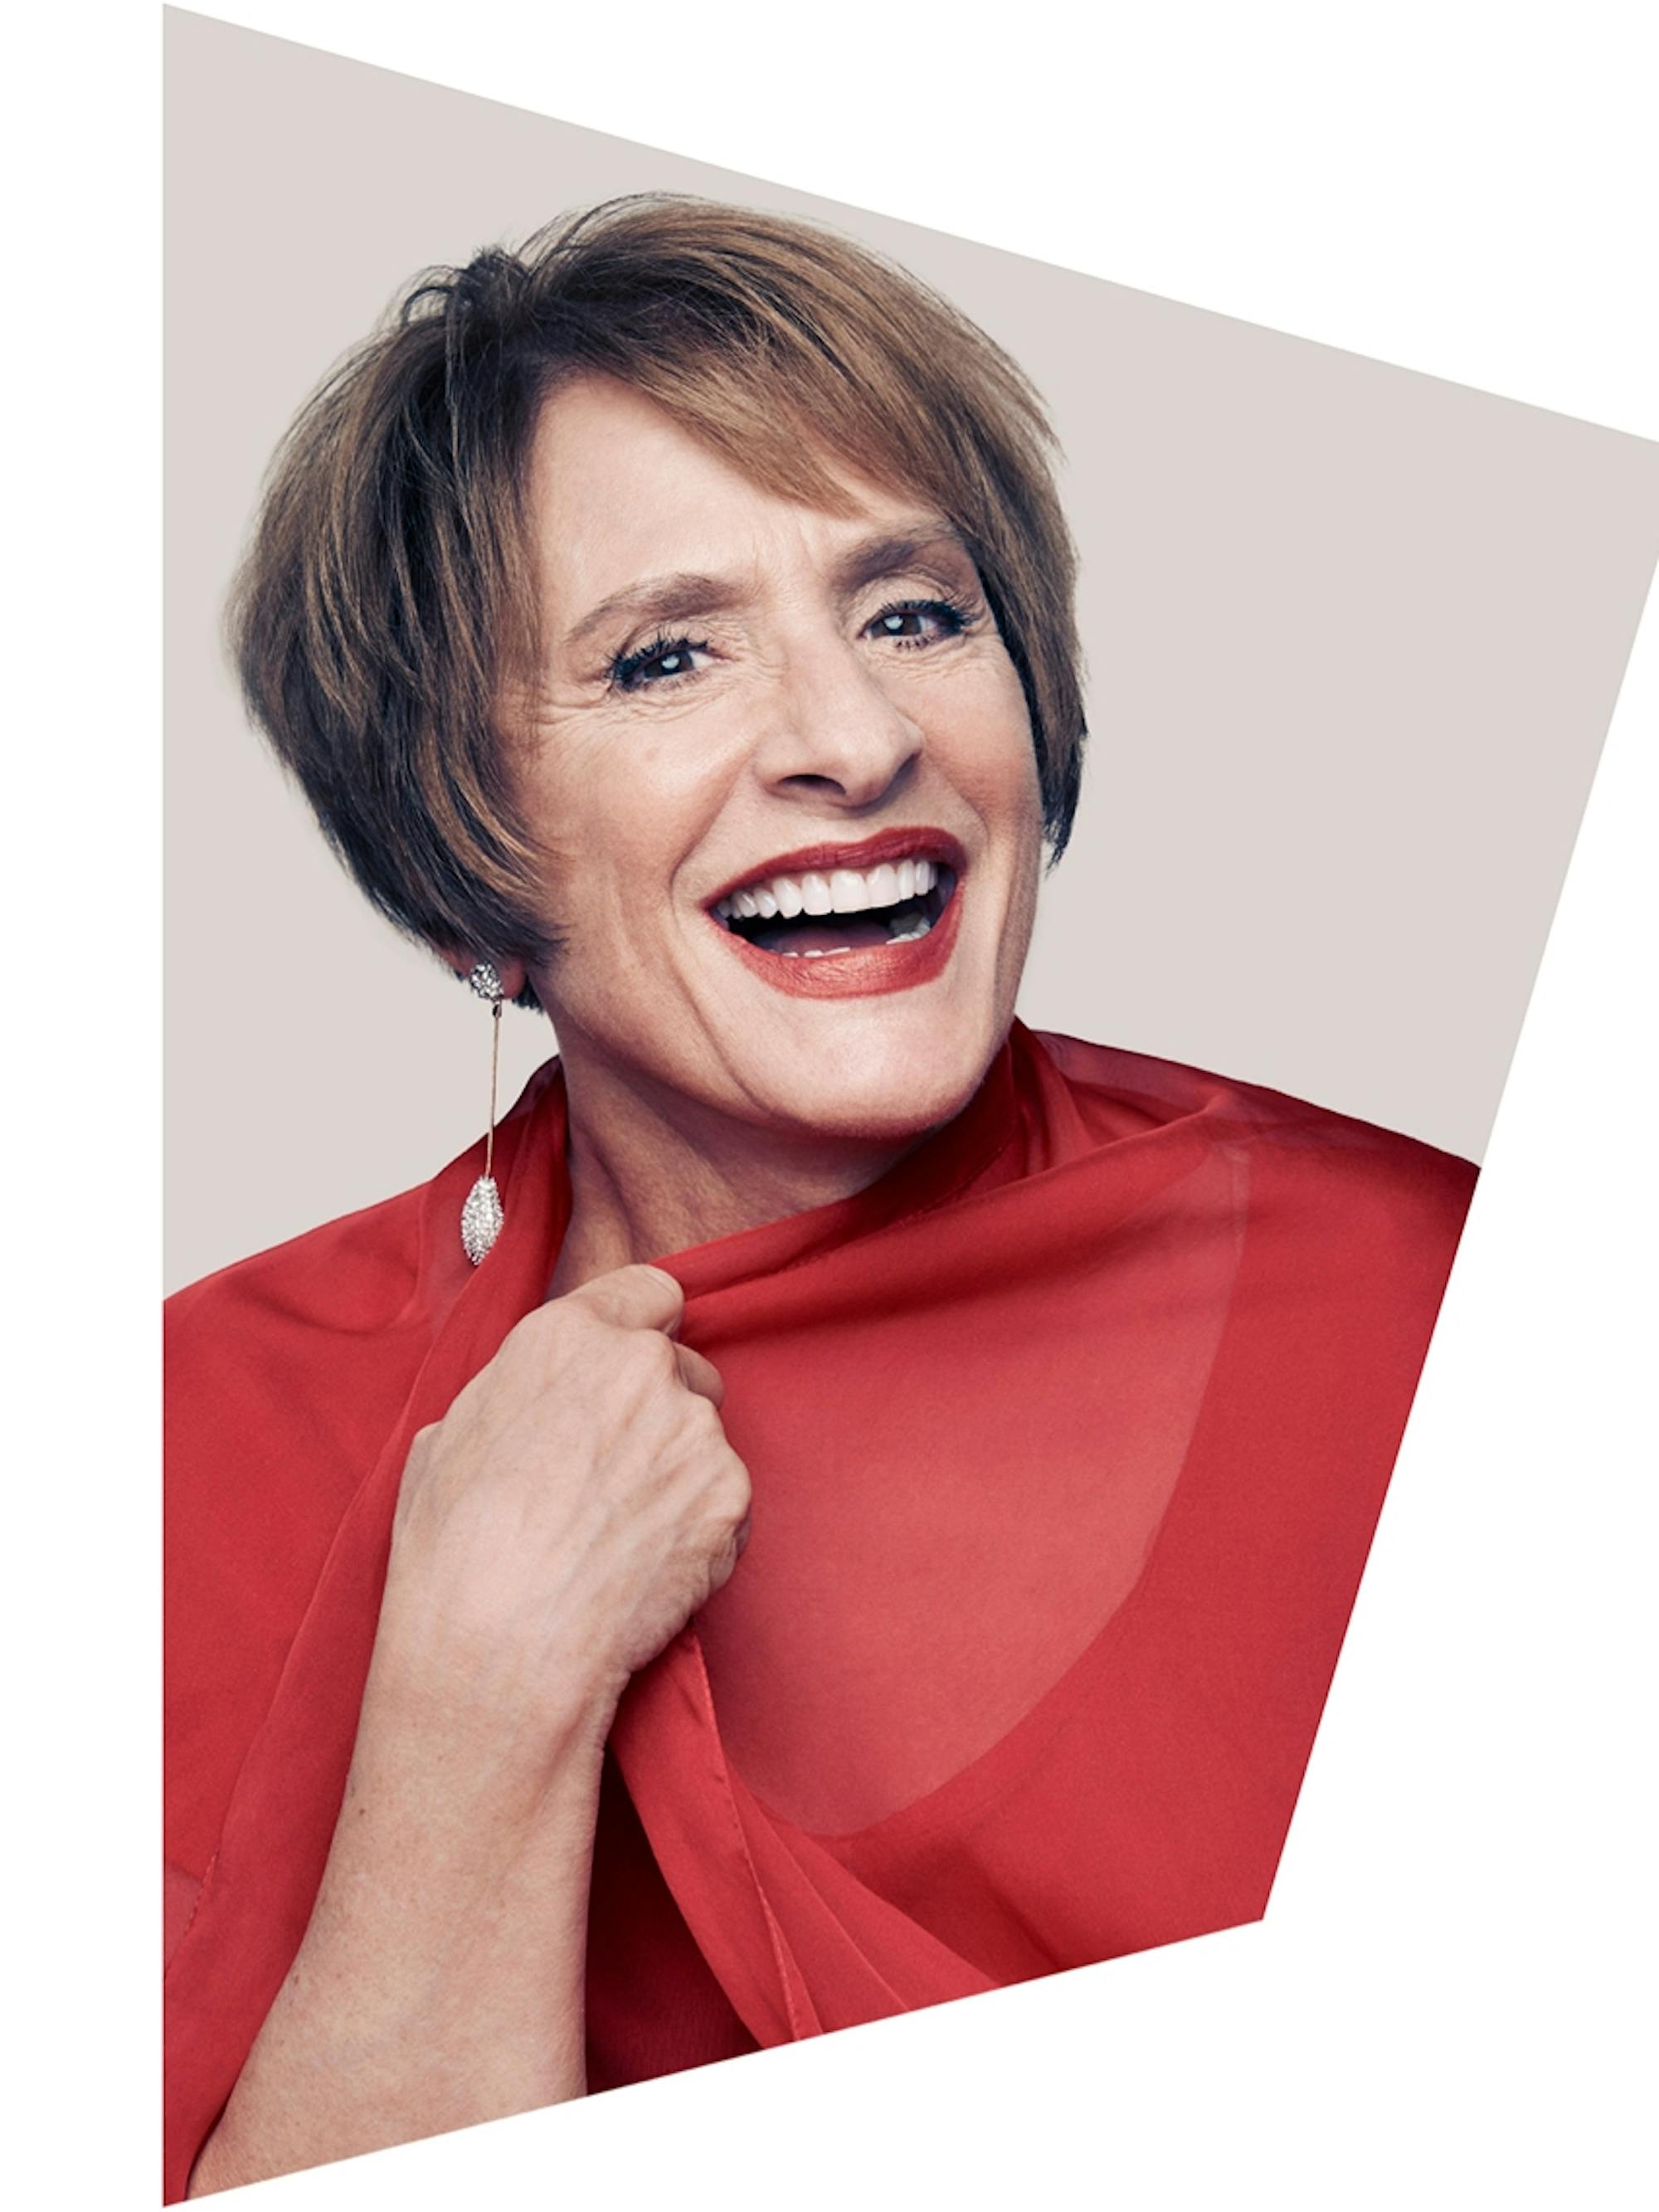 Actress Patti LuPone of Hollywood